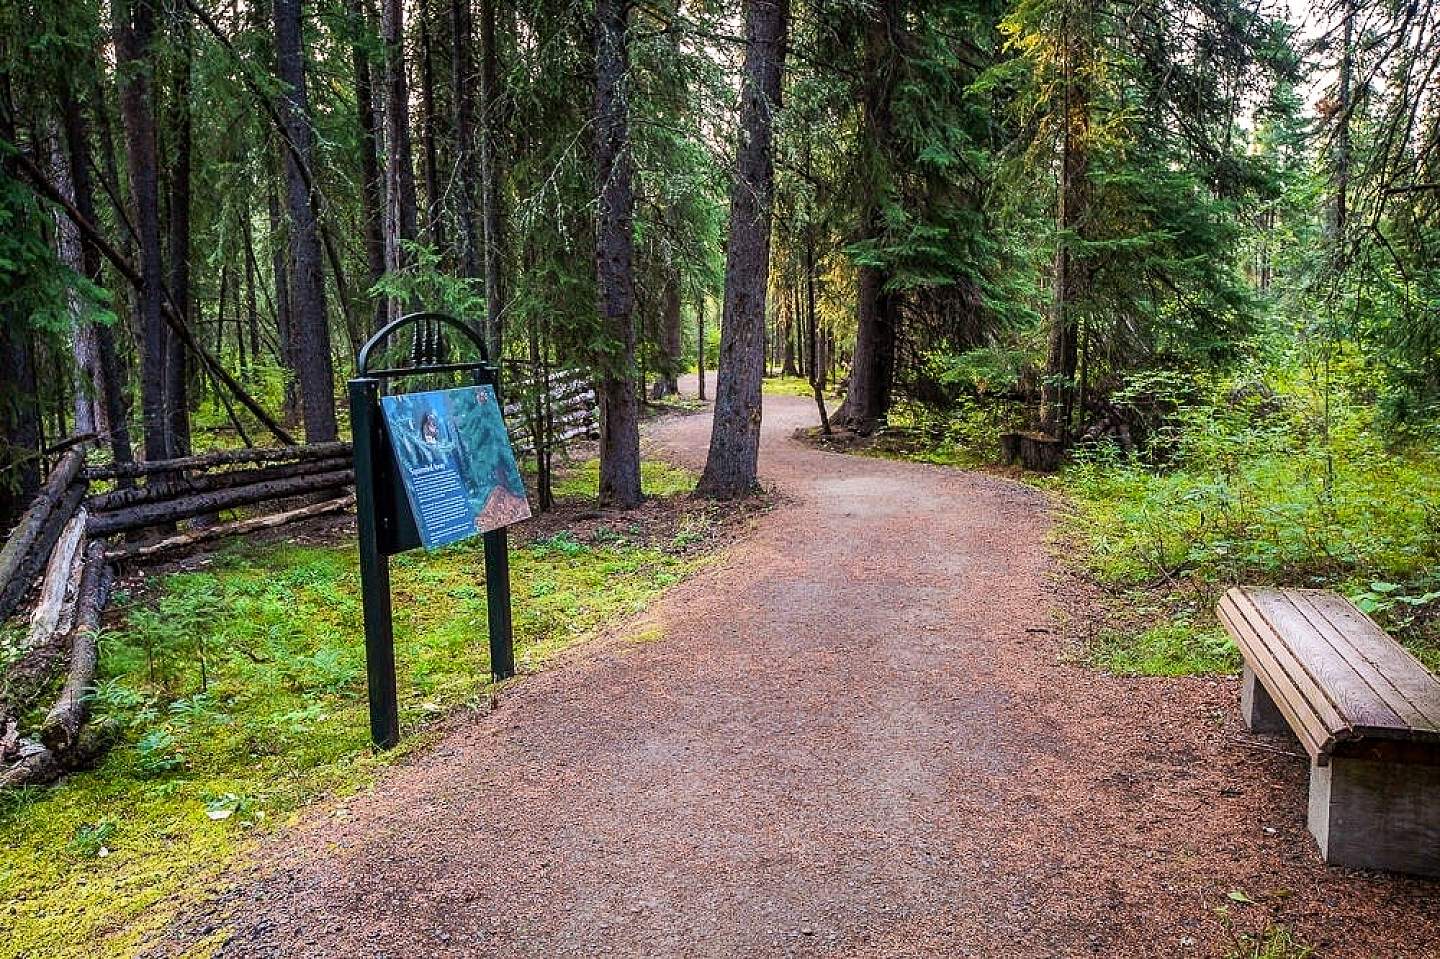 A serene forest path with a bench and an interpretive sign.